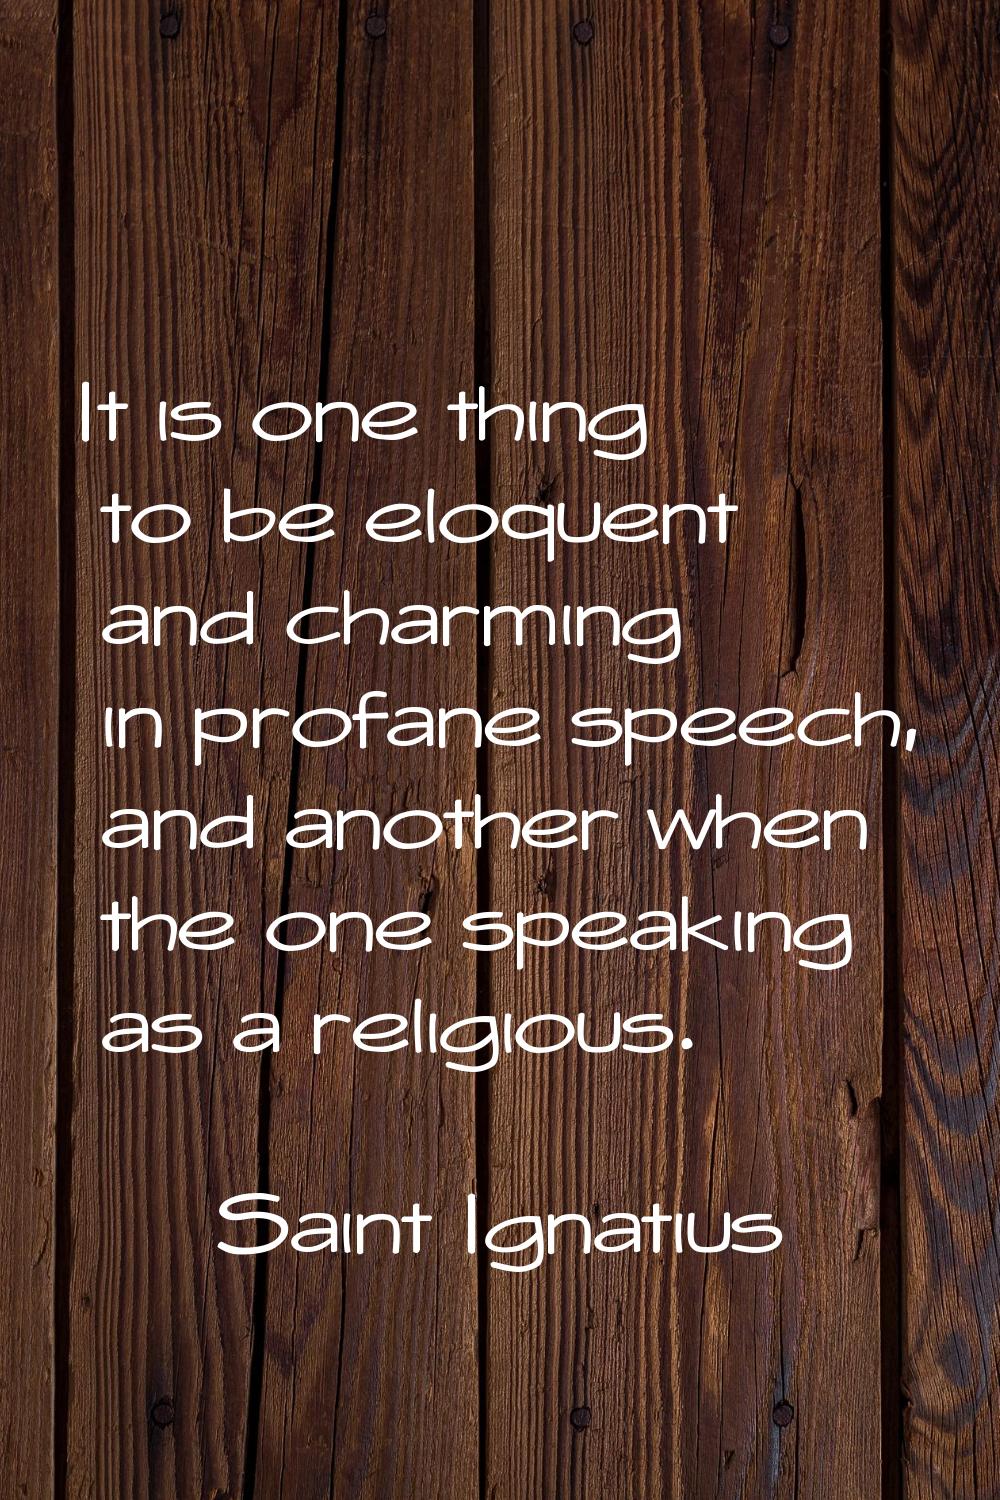 It is one thing to be eloquent and charming in profane speech, and another when the one speaking as